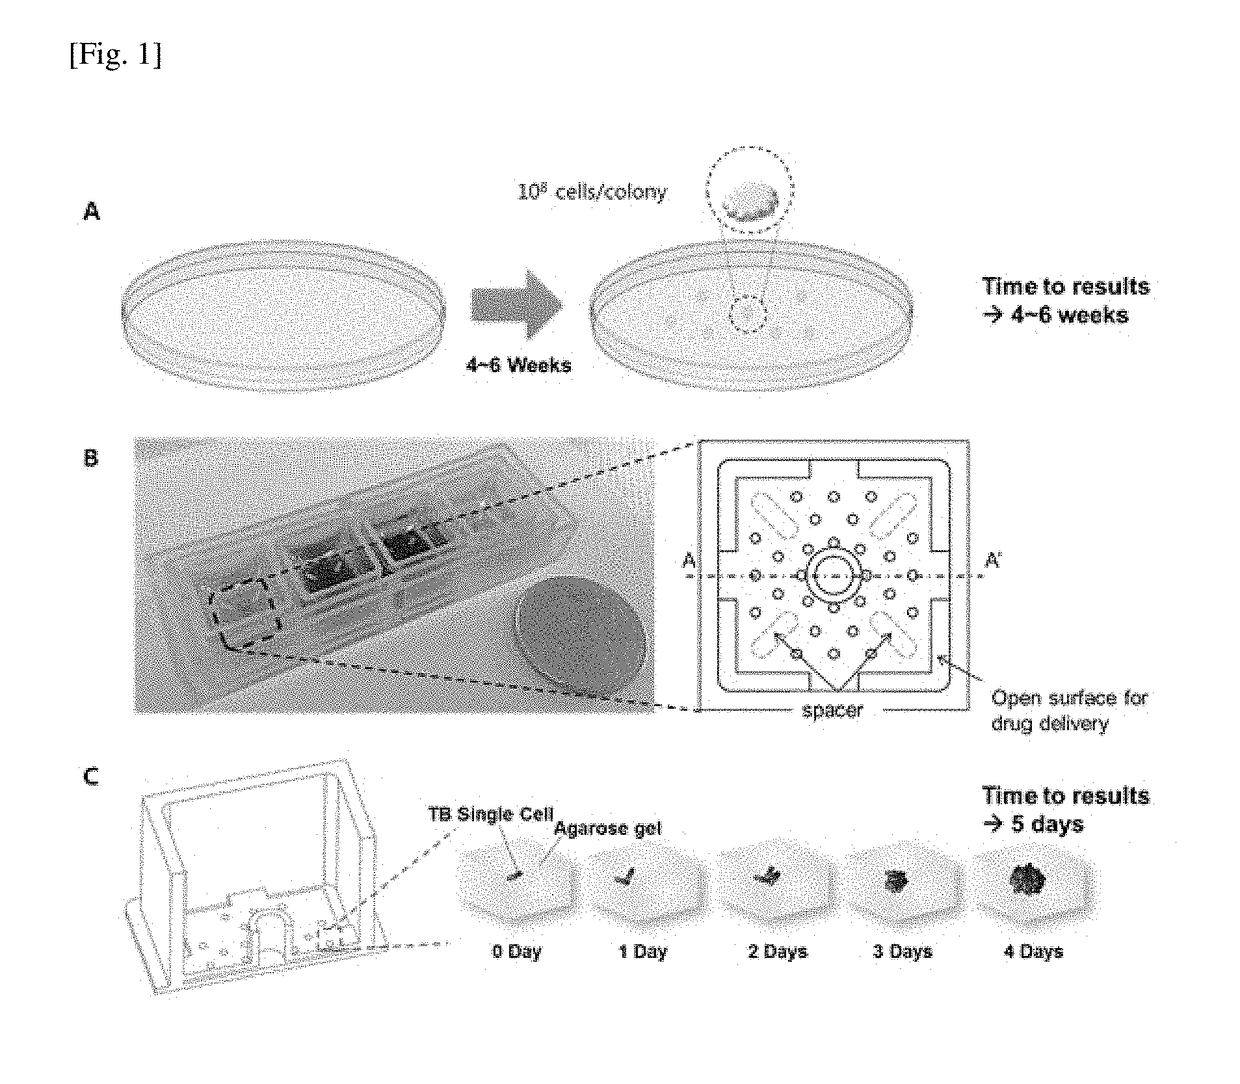 Novel bioactivity testing structure for single cell tracking using gelling agents